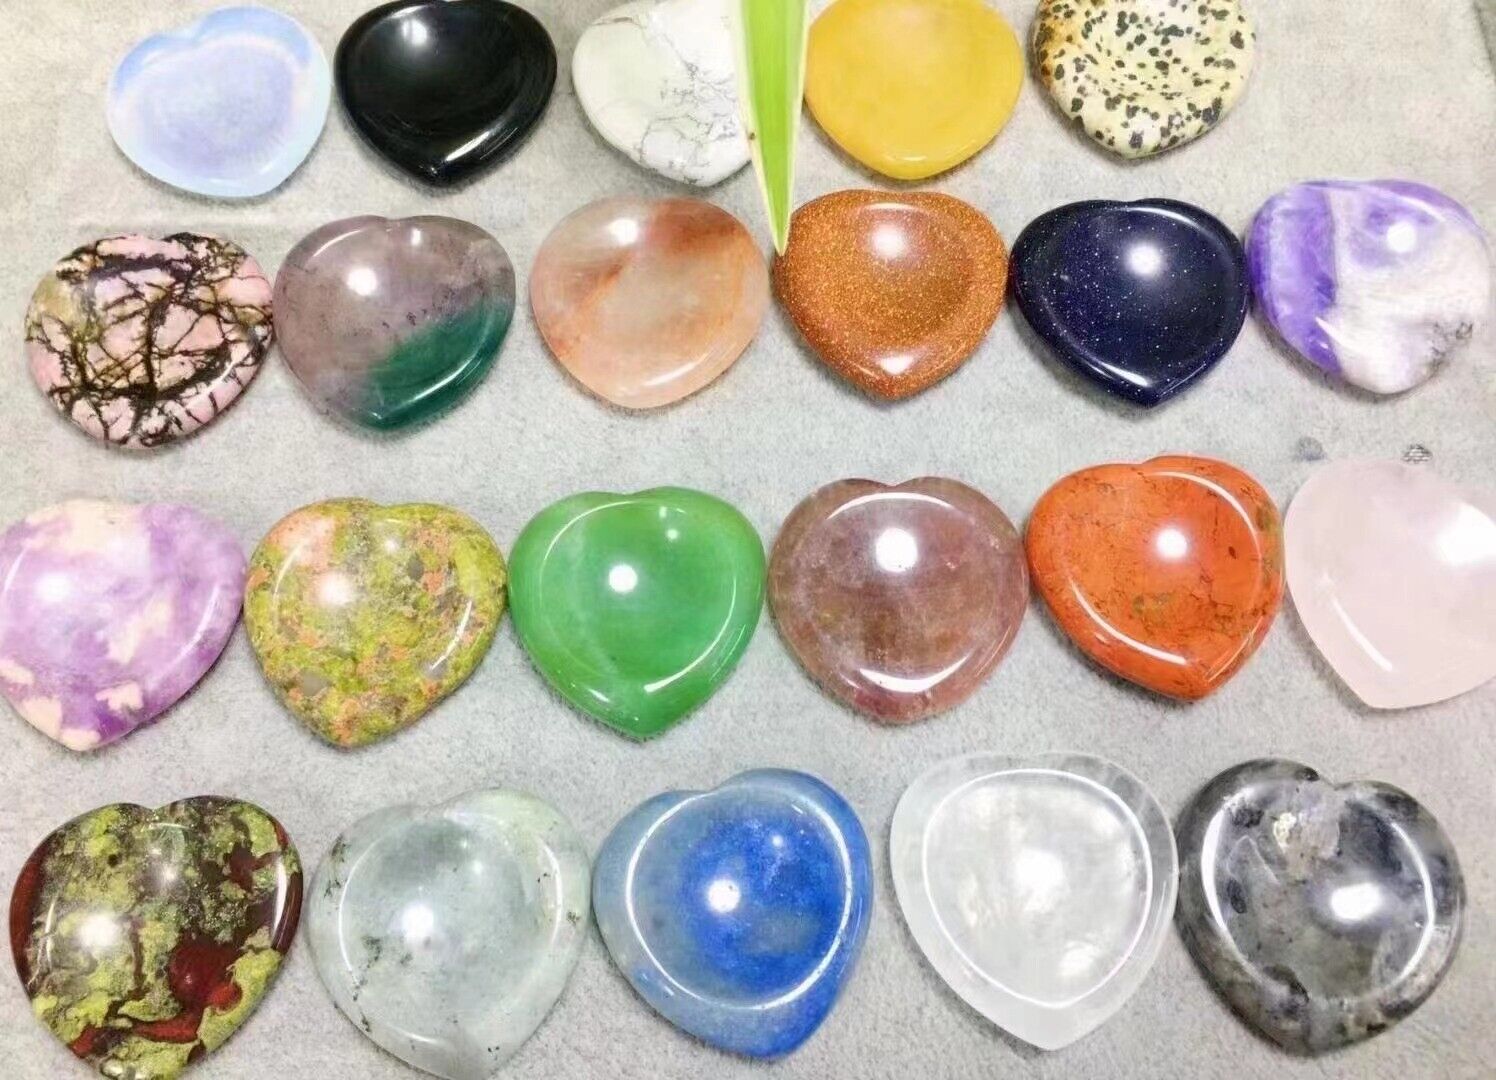 40mm Natural Mix material worry stone play with Crystal Quartz Healing Decorate